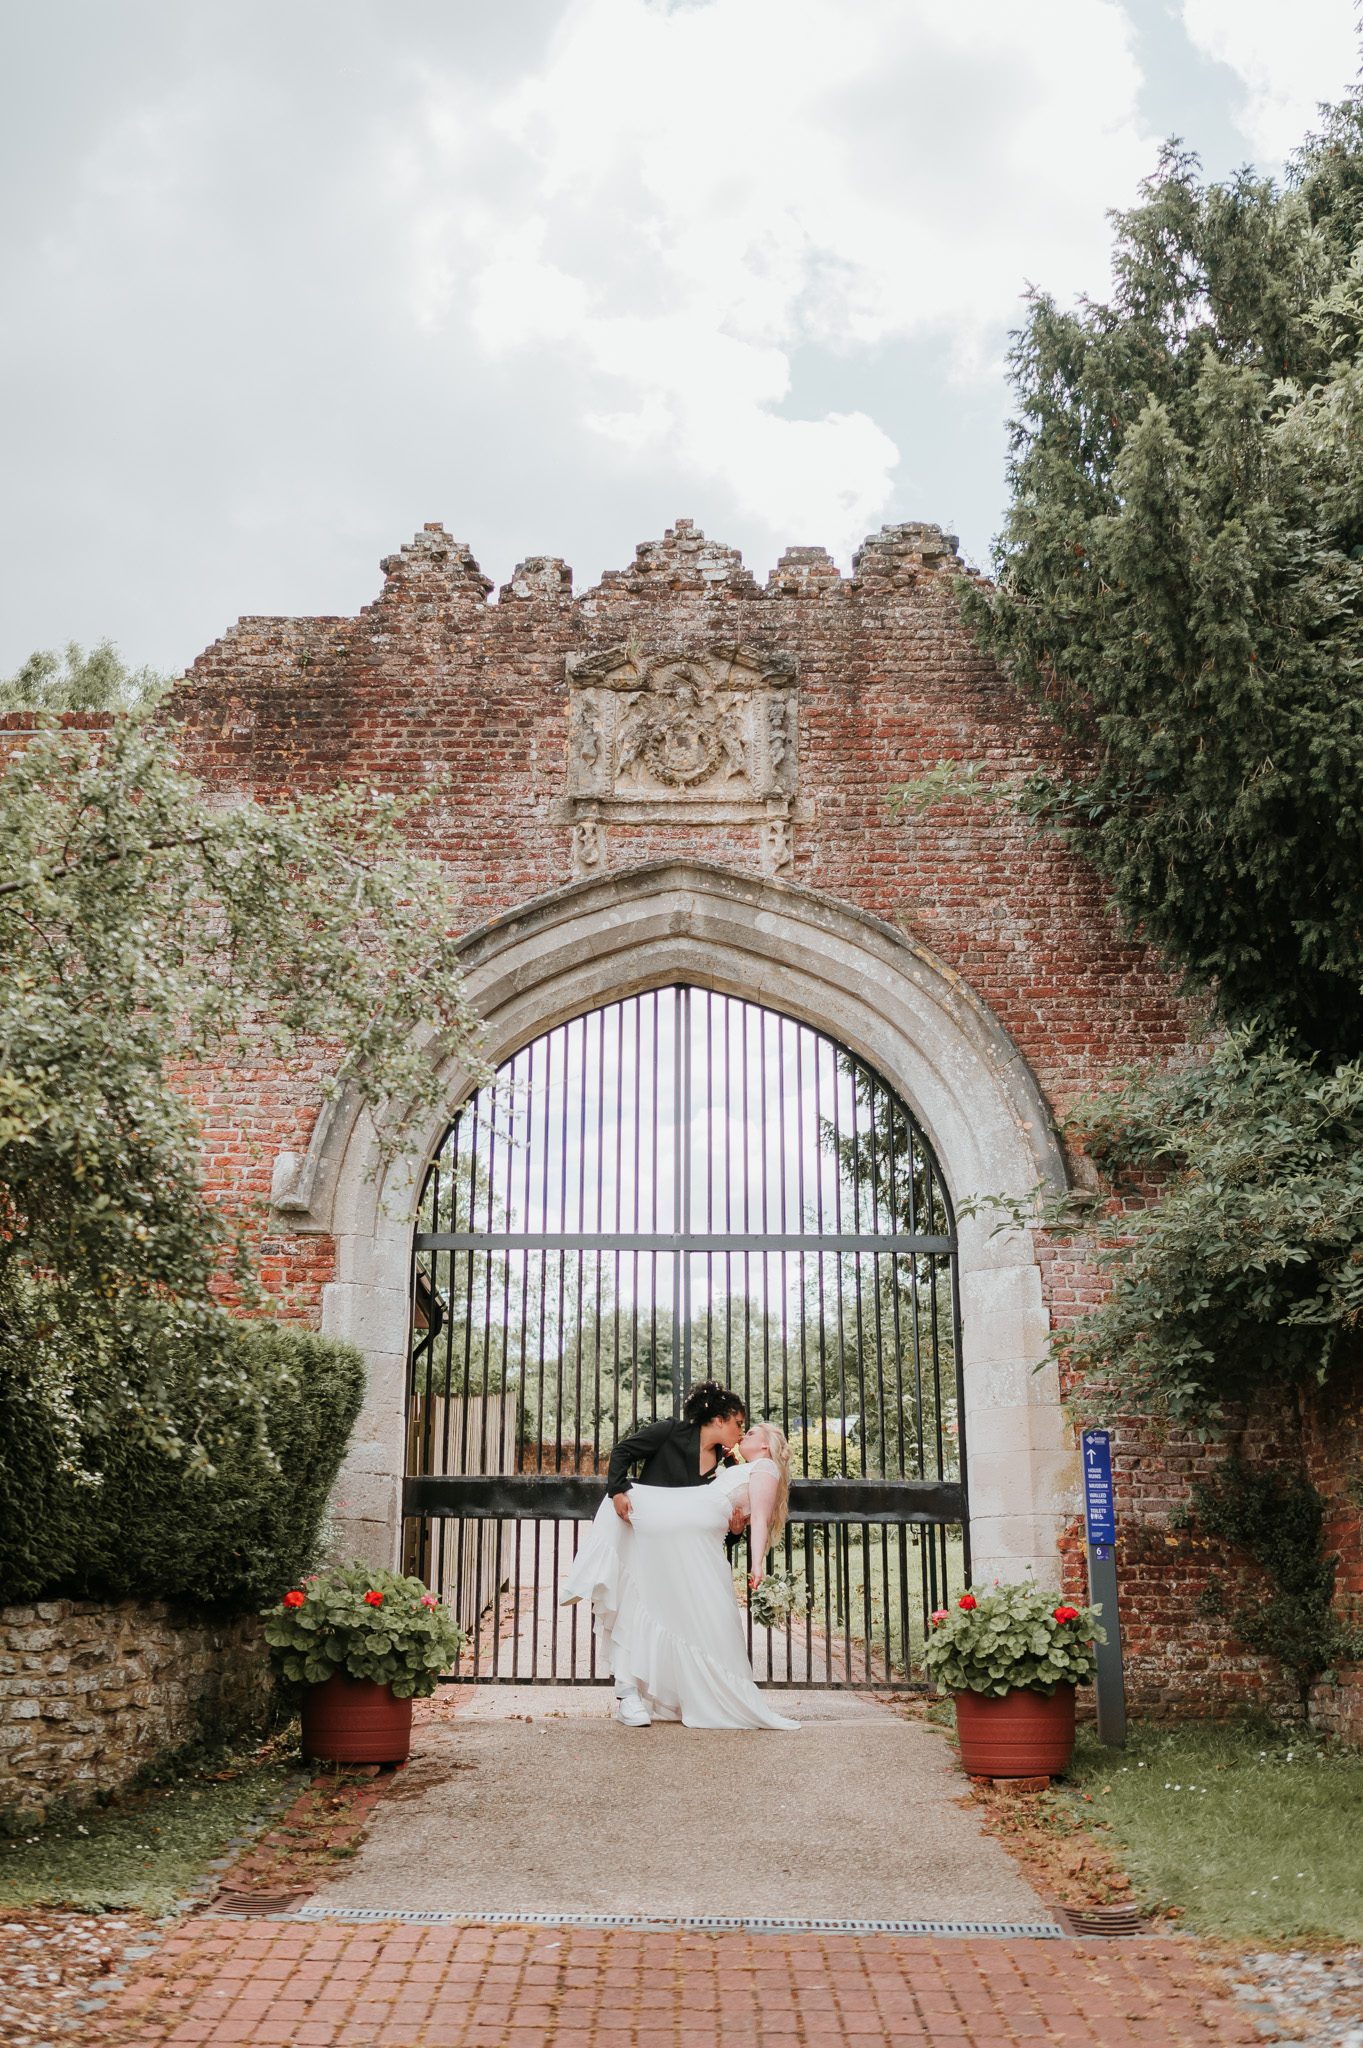 Bride and bride embracing after their wedding ceremony in front of a gate to castle ruins